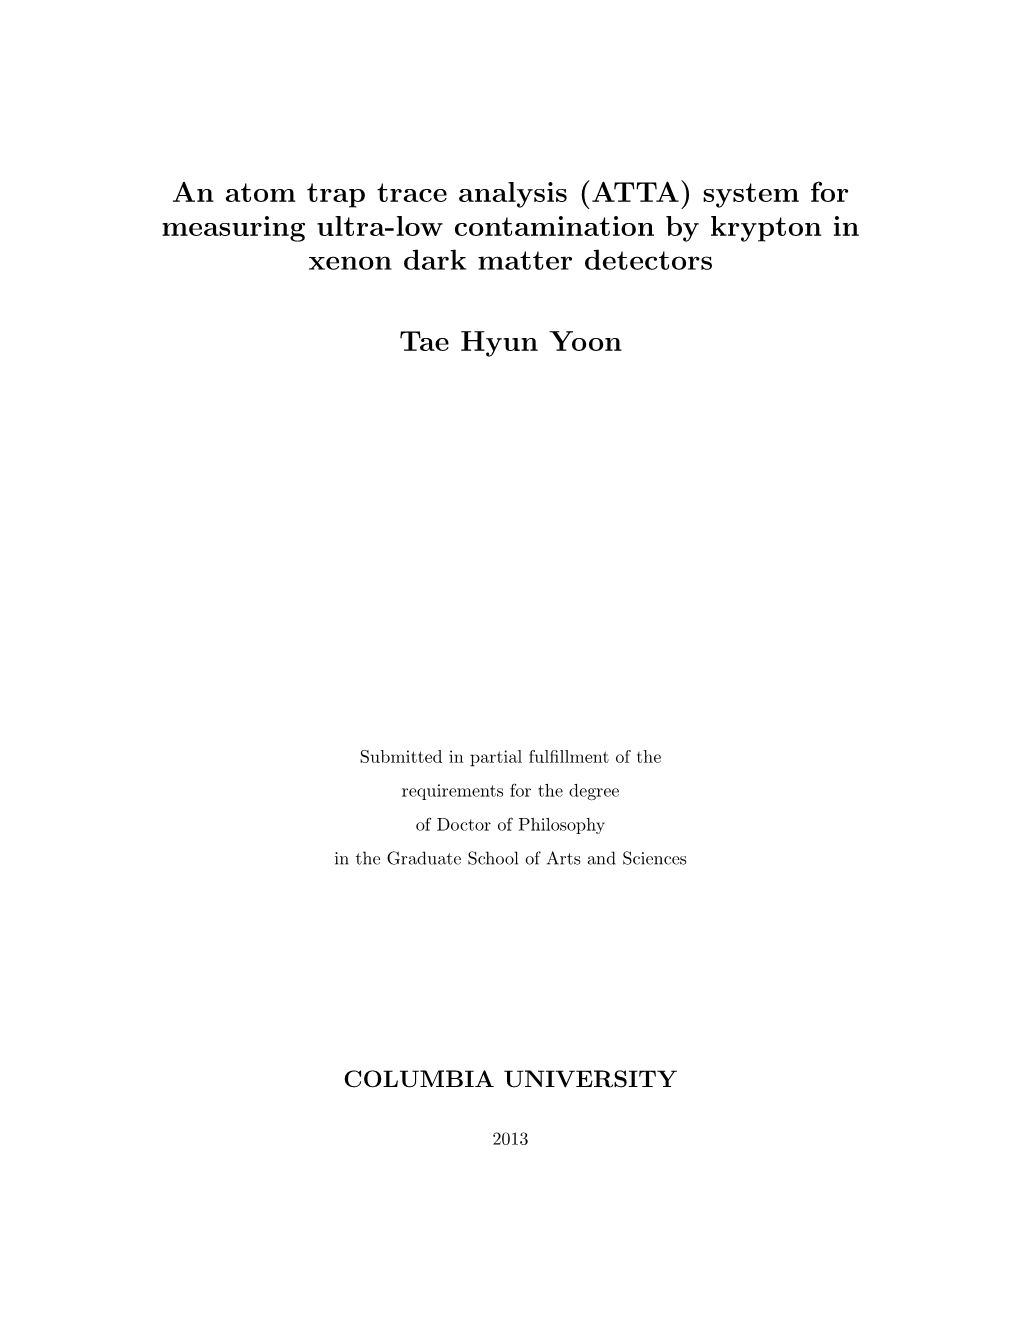 An Atom Trap Trace Analysis (ATTA) System for Measuring Ultra-Low Contamination by Krypton in Xenon Dark Matter Detectors